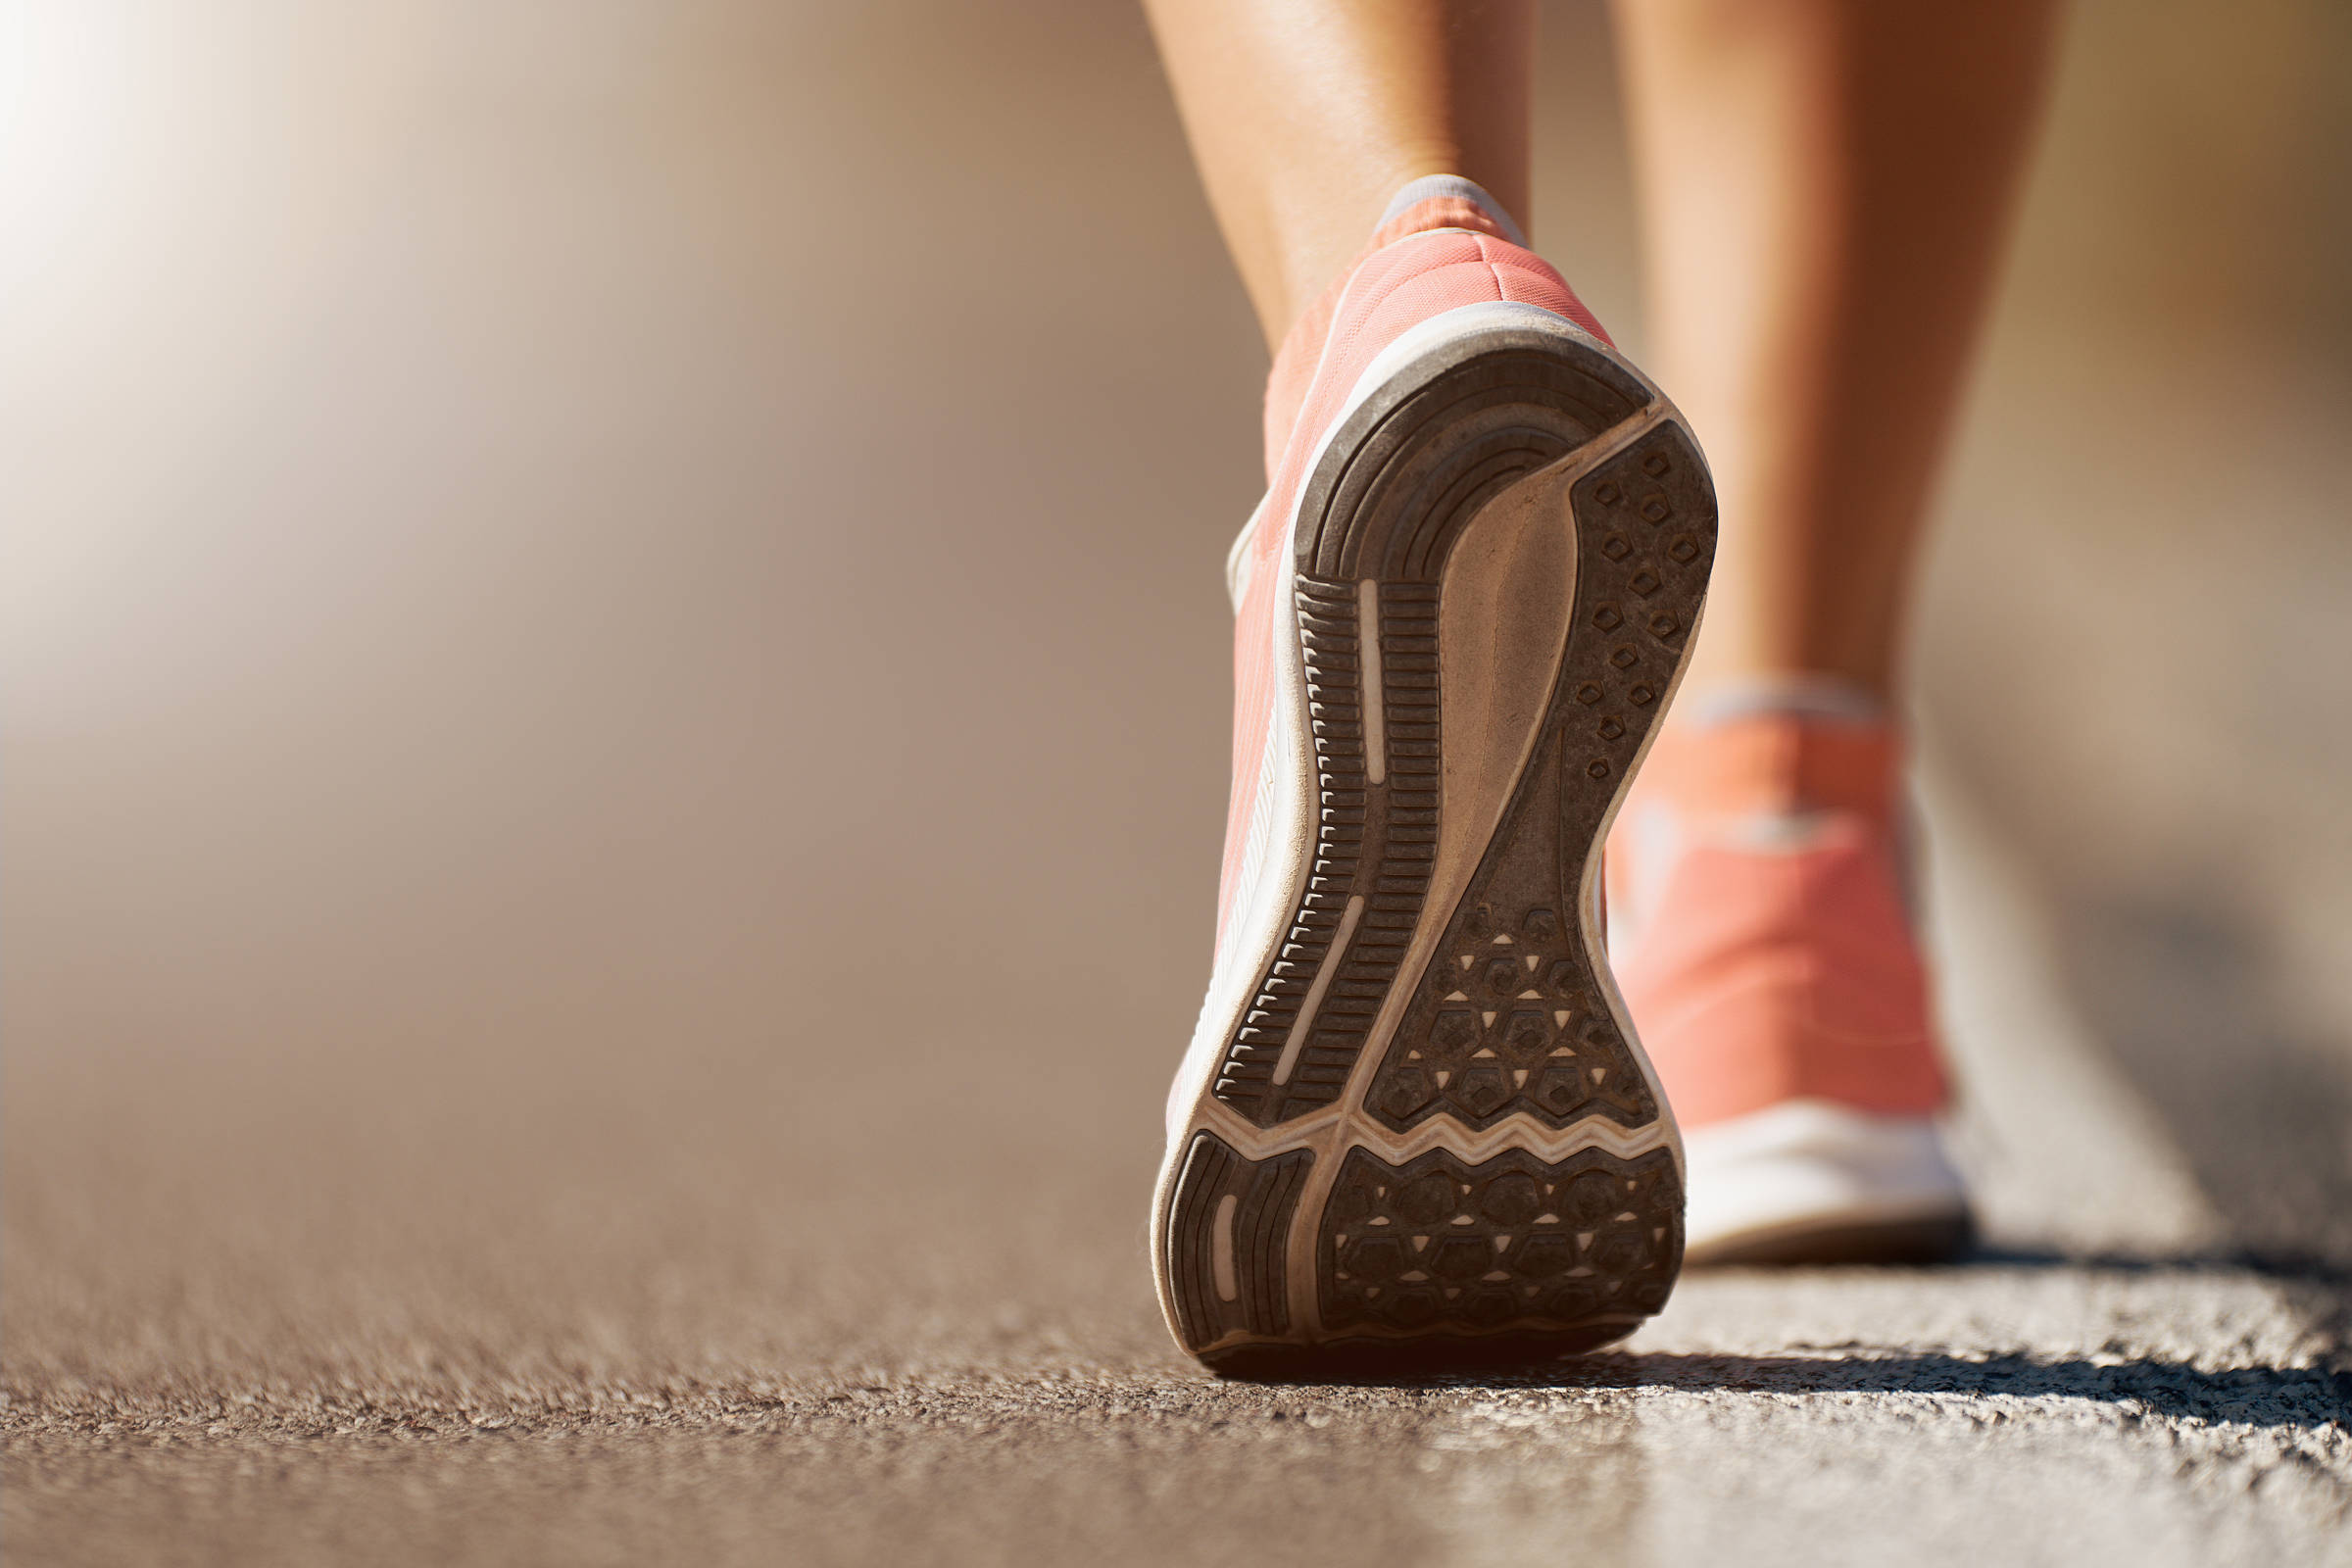 Running or walking?  Discover the health benefits that the practices promote